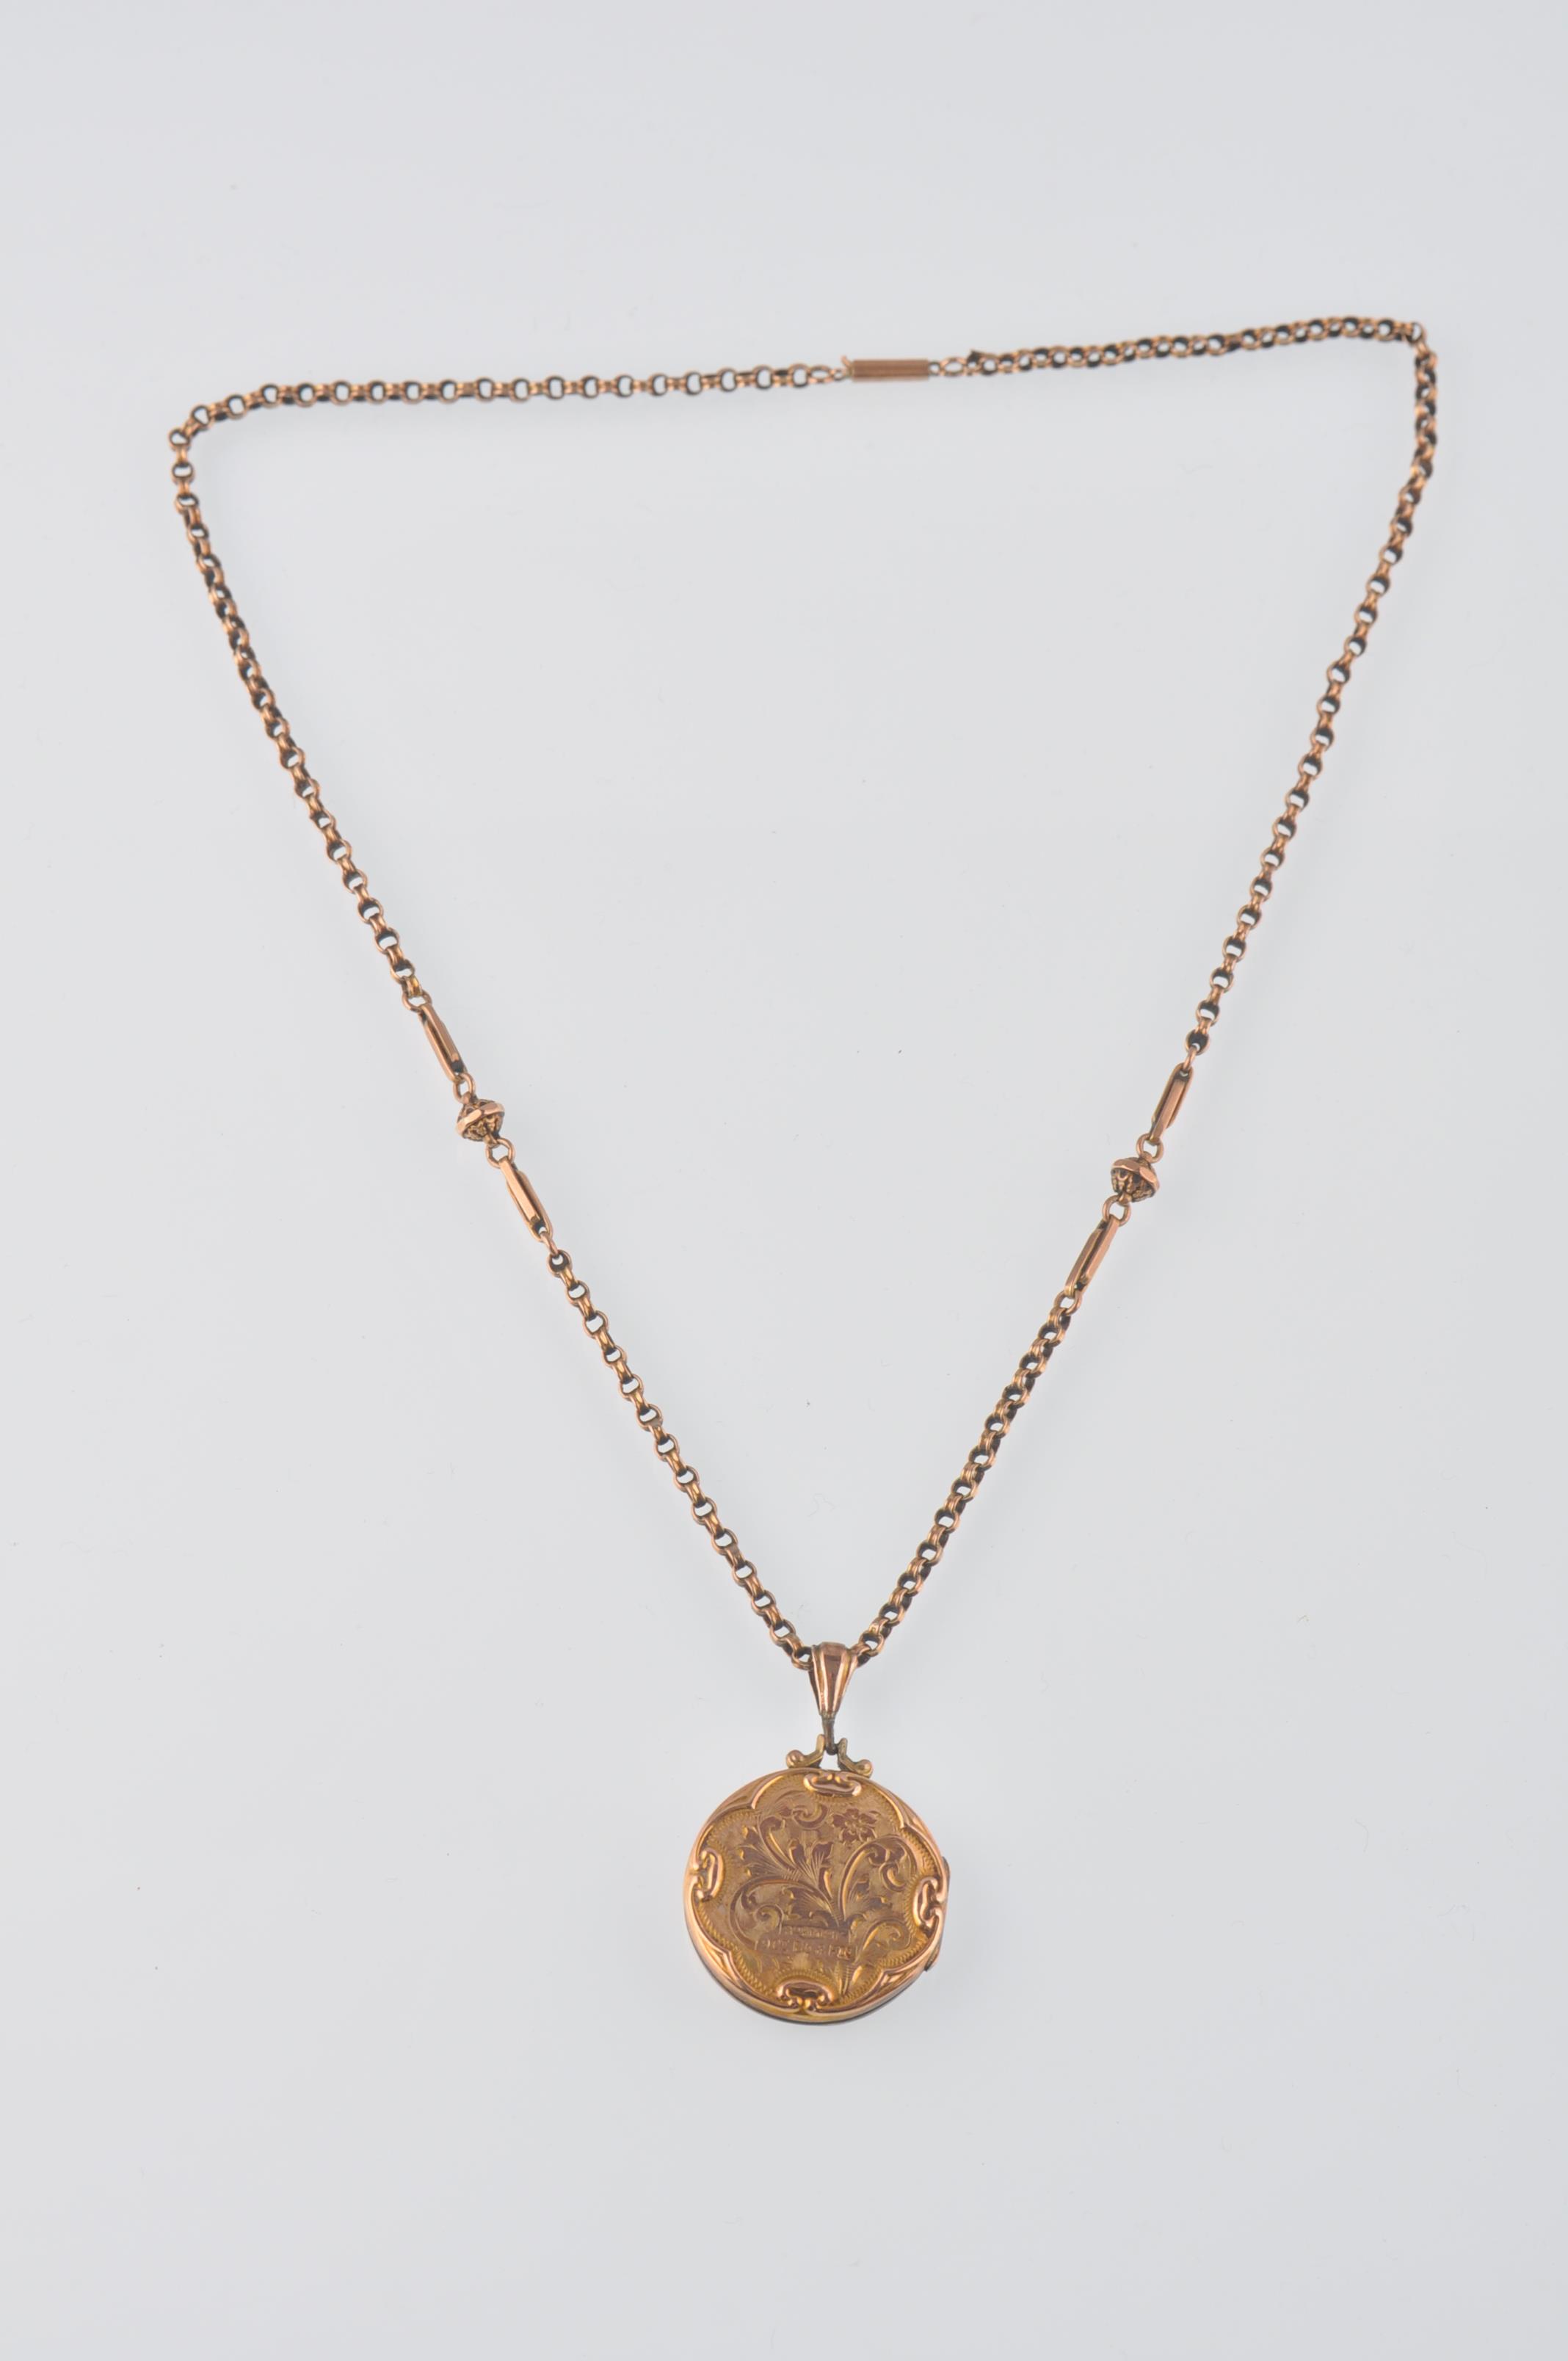 9CT GOLD F&B LOCKET AND ROLLED GOLD BOOK CHAIN - Image 5 of 5